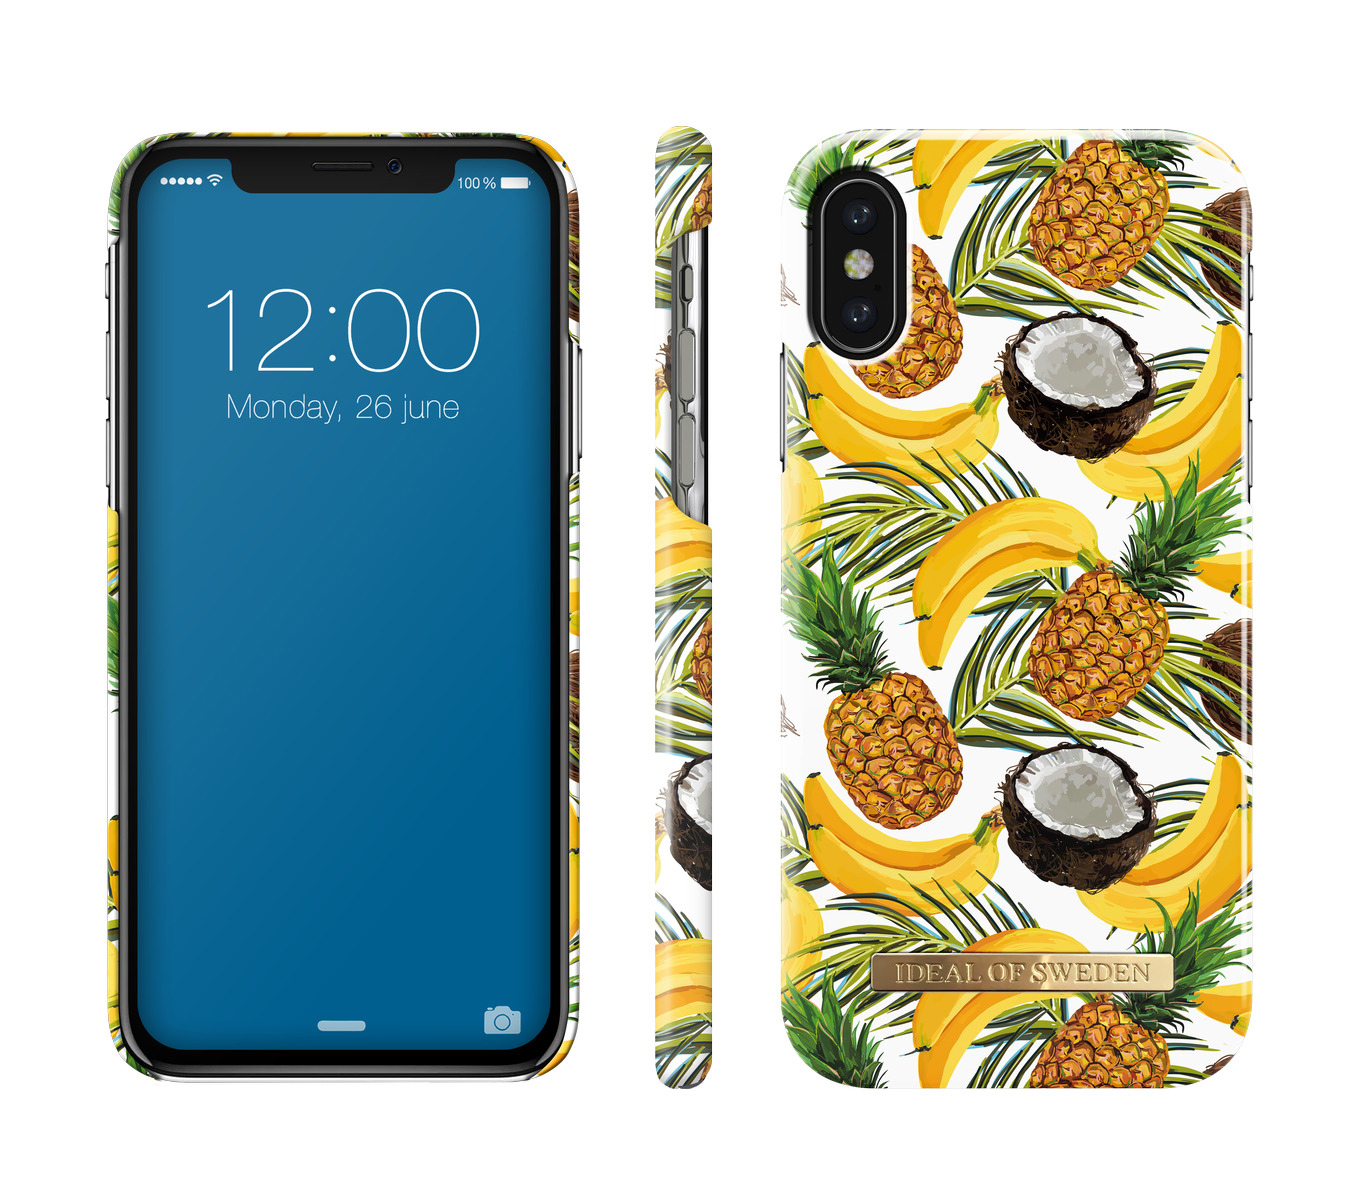 Fashion, Coconut Backcover, iPhone Apple, Banana X, SWEDEN OF IDEAL